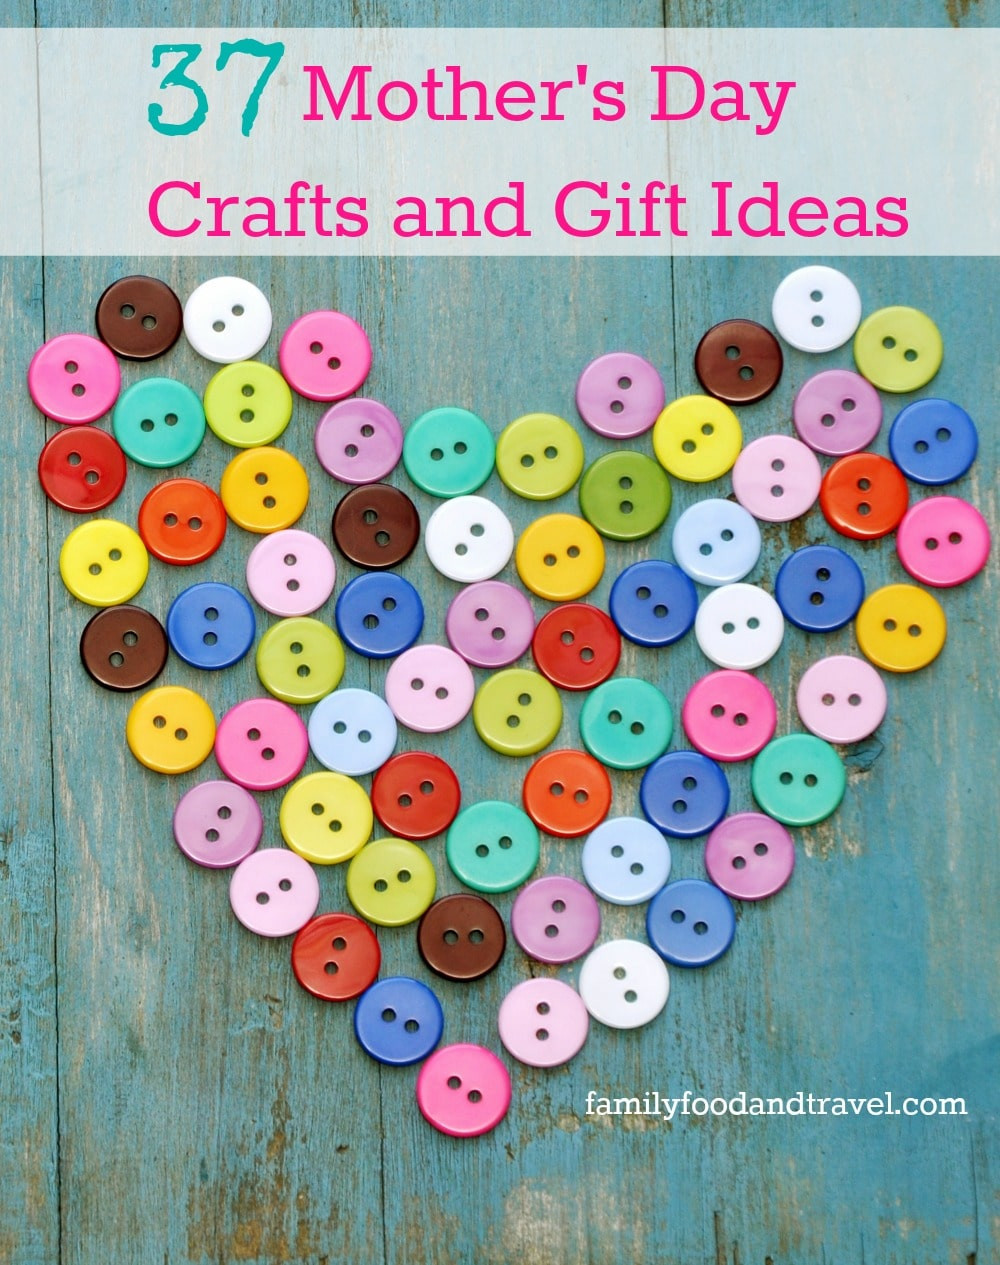 Mother Day Craft Gift Ideas
 37 Mothers Day Crafts and Gift Ideas